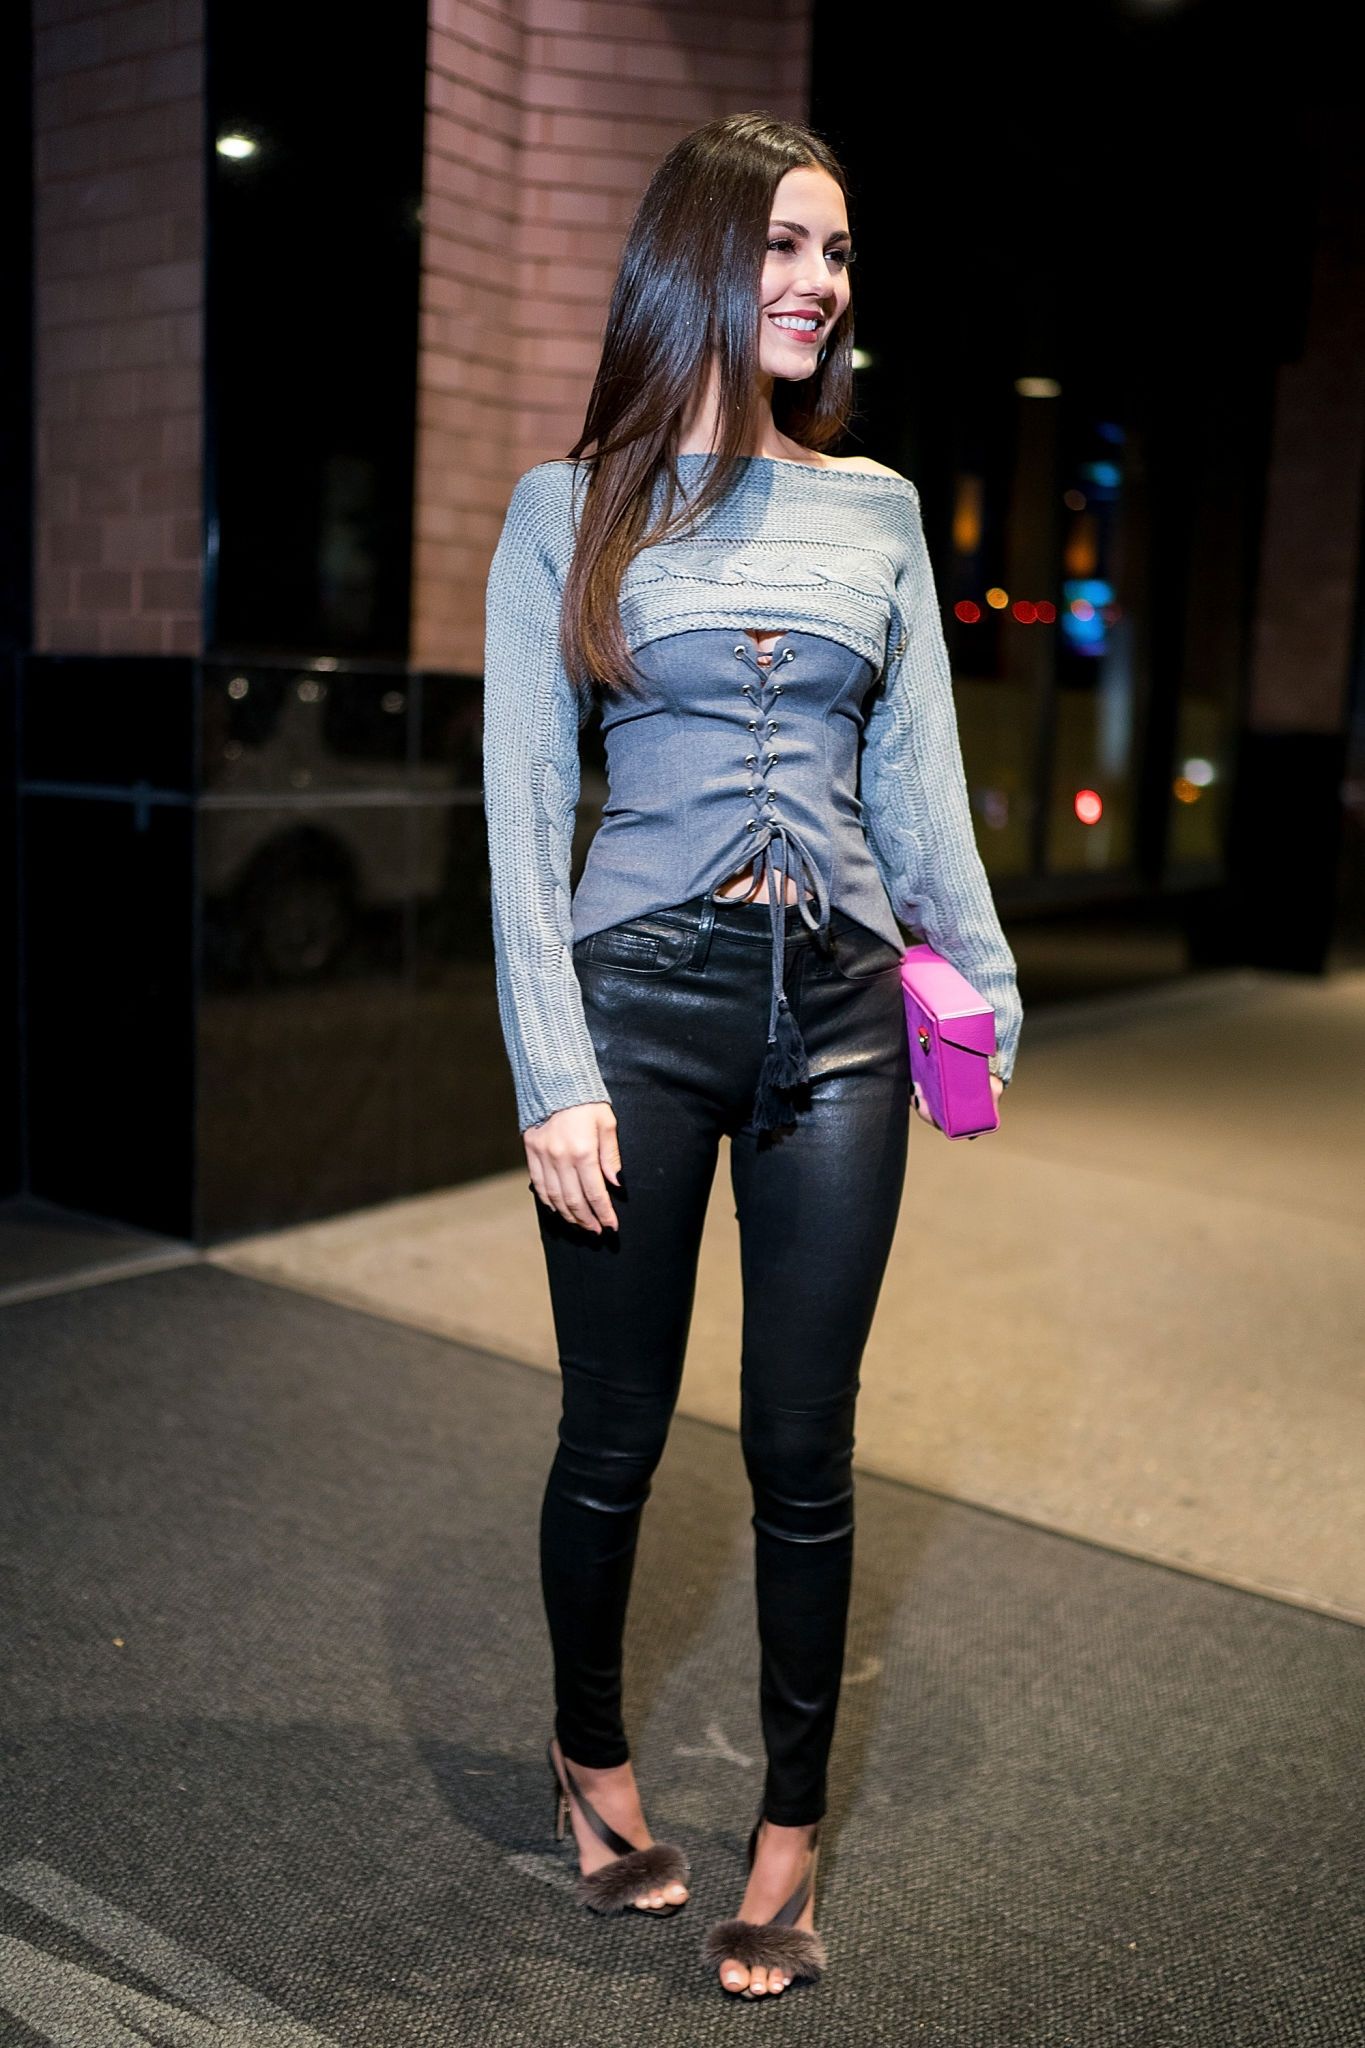 Victoria Justice leaving Her New York Hotel